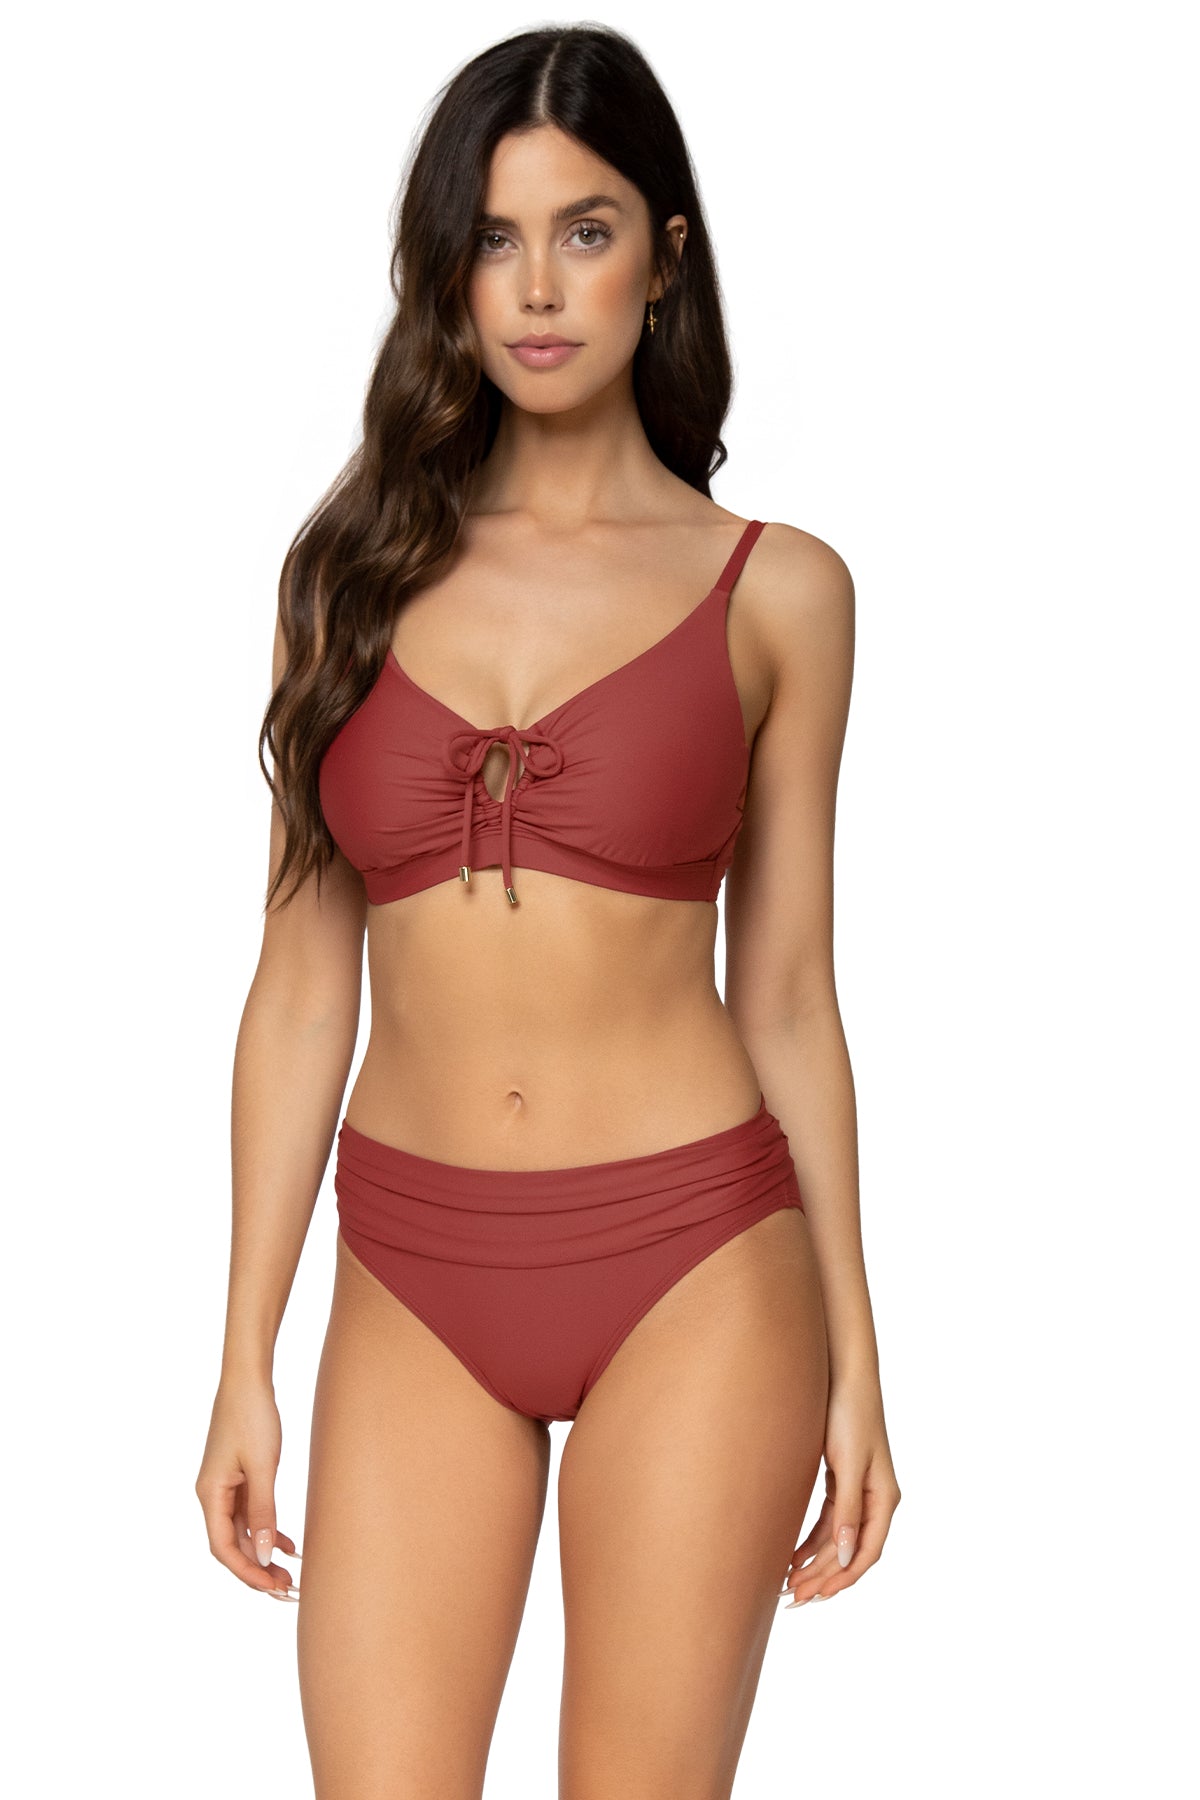 Front view of Sunsets Tuscan Red Kauai Keyhole Top with matching Unforgettable Bottom bikini